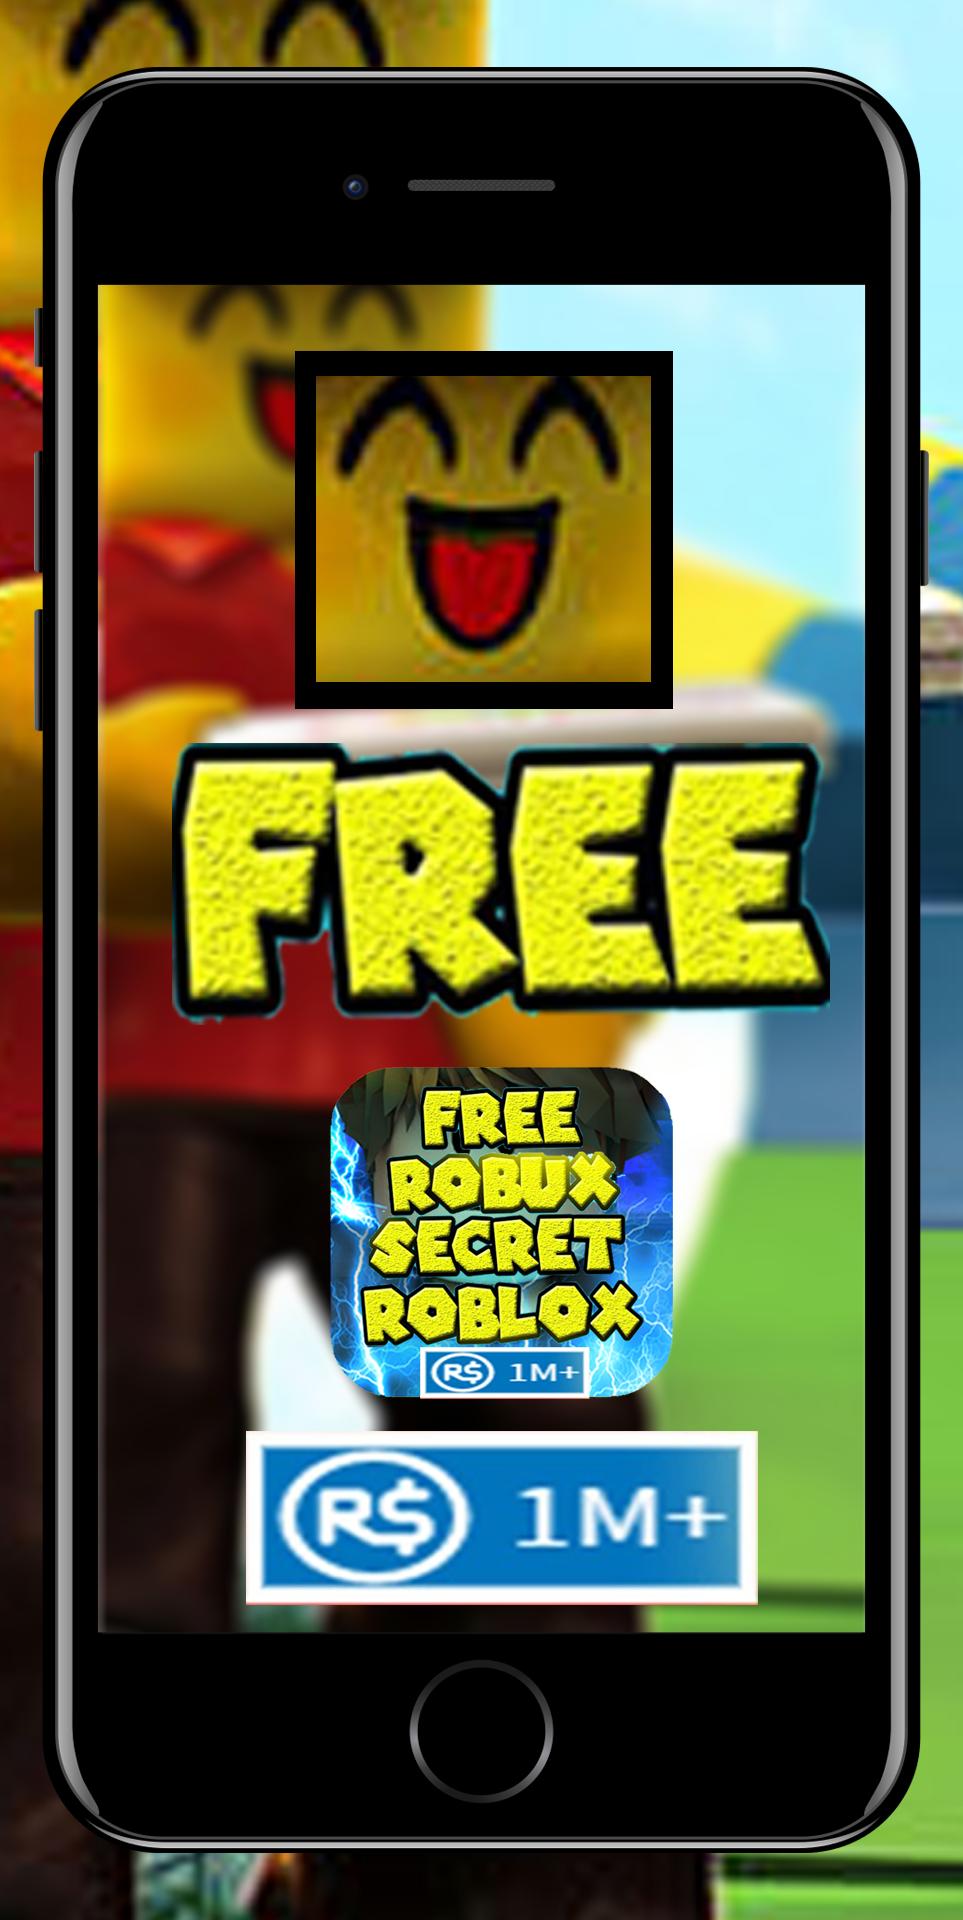 Unlimited Free Robux And Tix For Roblox Prank For Android Apk Download - ดาวนโหลด unlimited free robux and tix for roblox prank